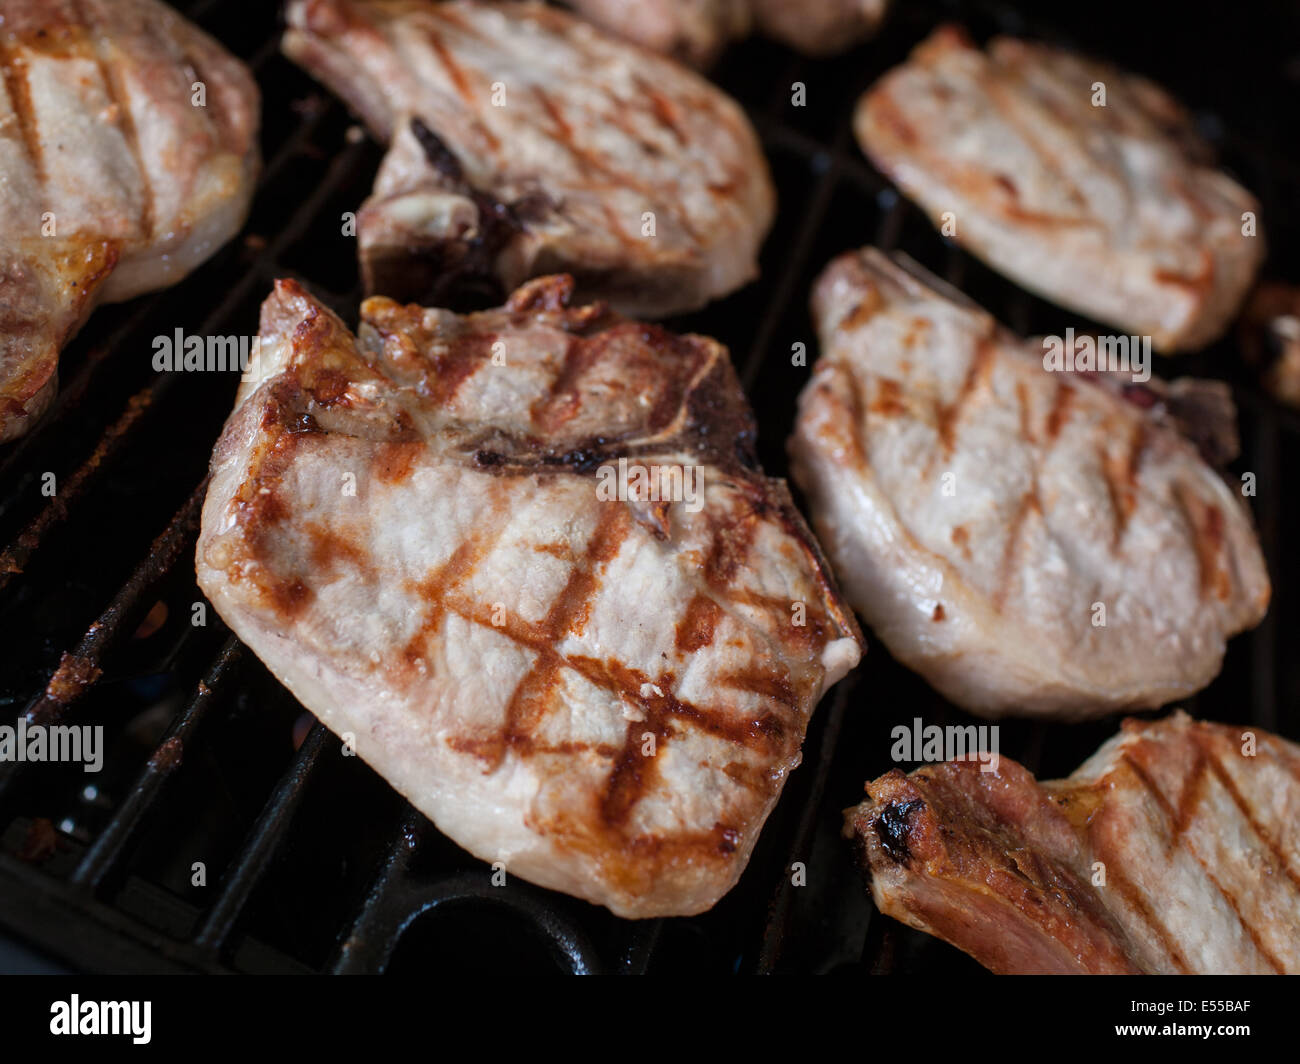 Pork Chops cooking on a grill Stock Photo